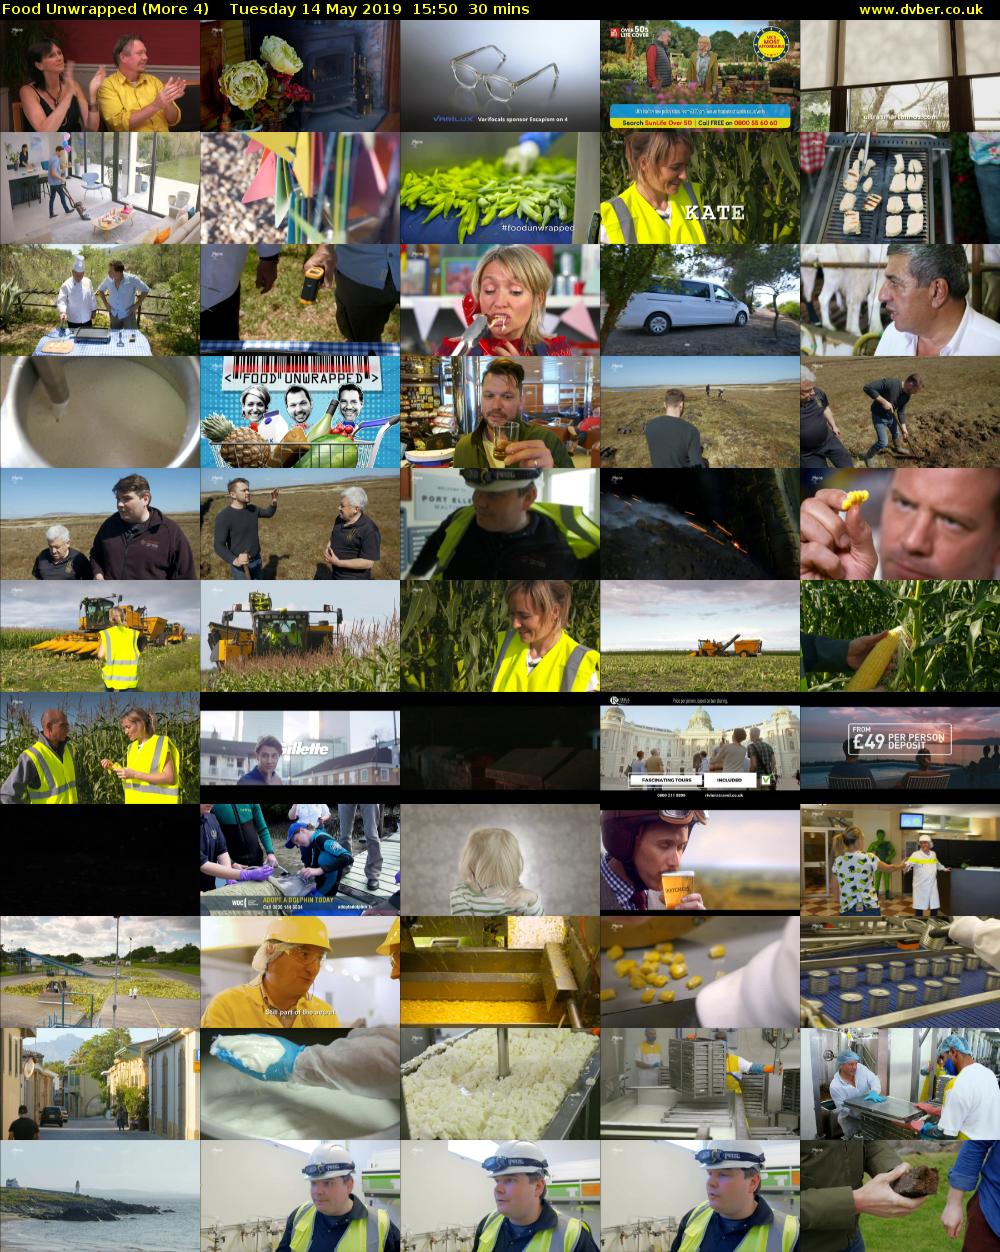 Food Unwrapped (More 4) Tuesday 14 May 2019 15:50 - 16:20